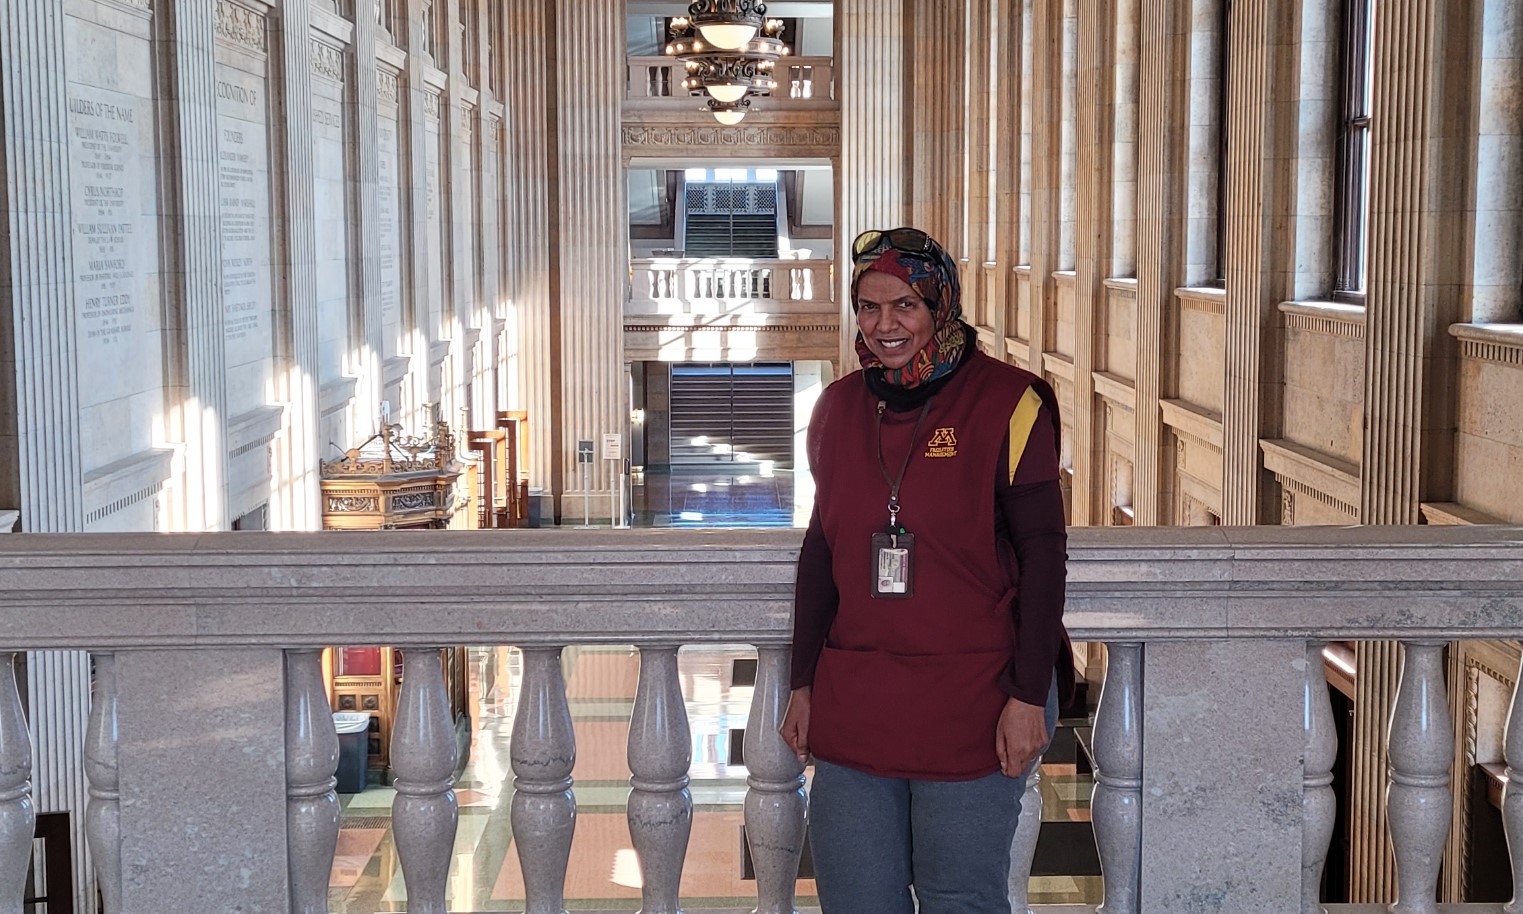 Fatma standing on 2nd floor overlooking the main entry lobby area